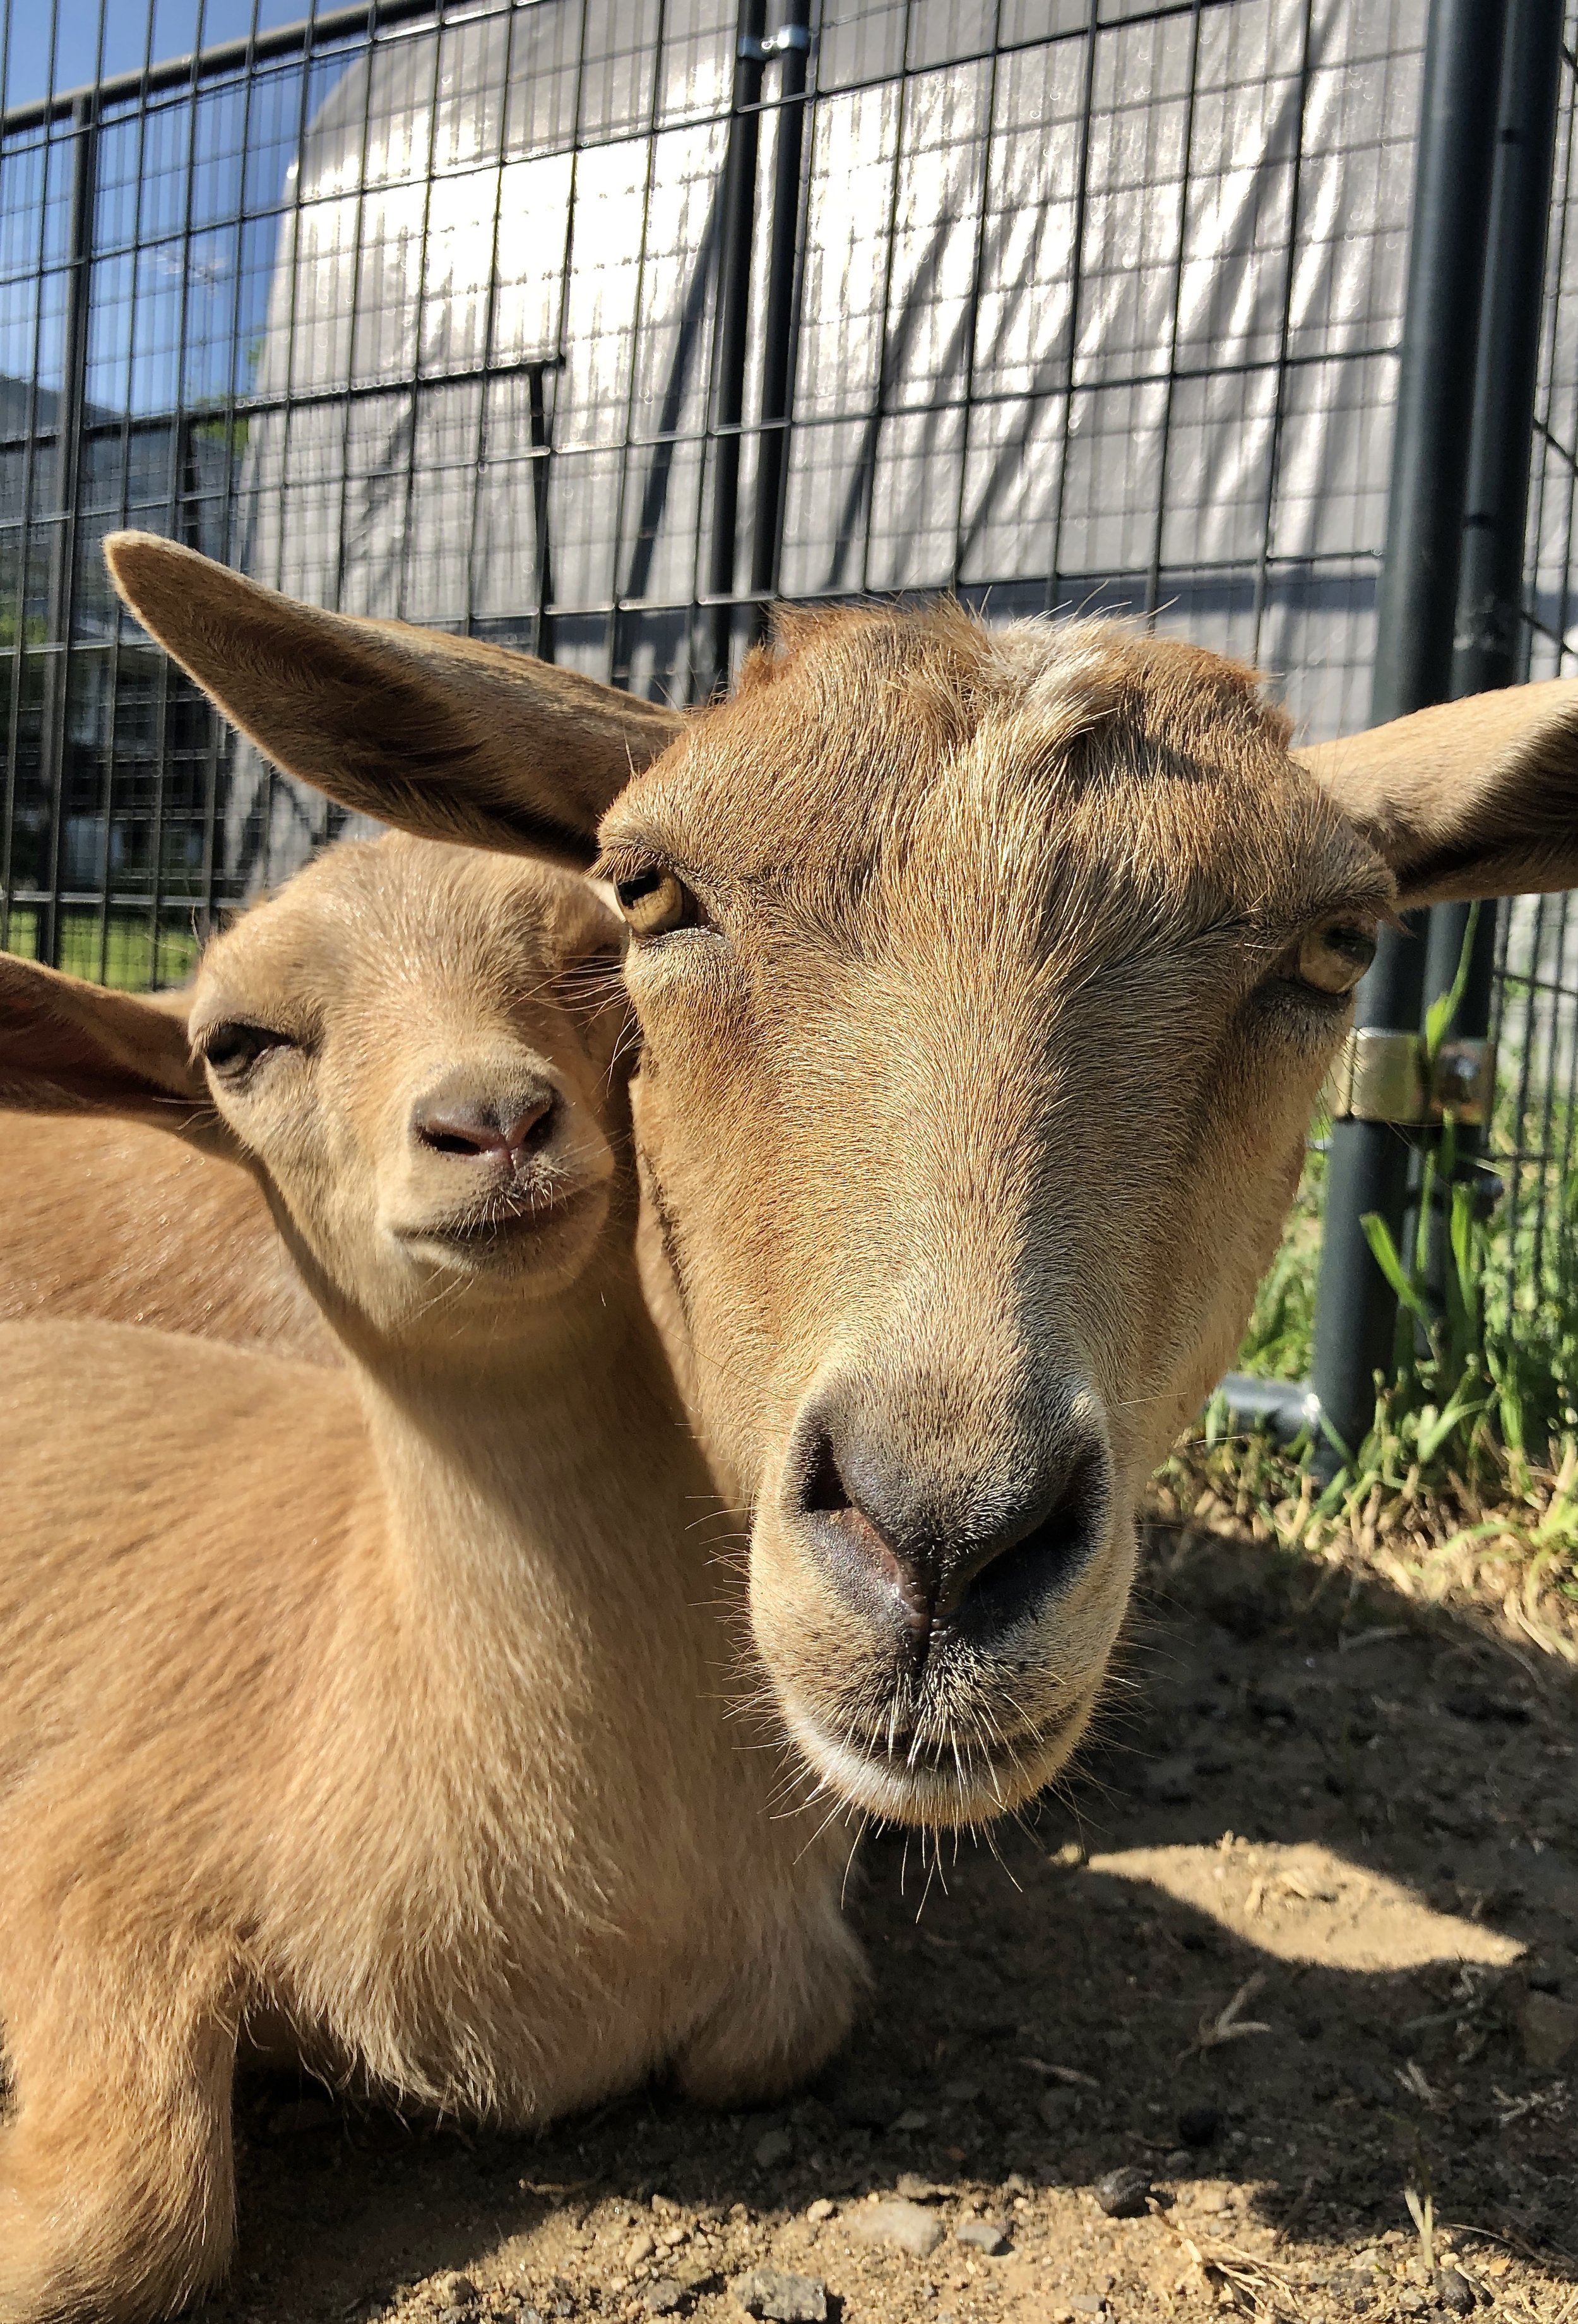 Blondi with her daughter; Old Mountain Farm Dirty Blonde - May 30th 2022